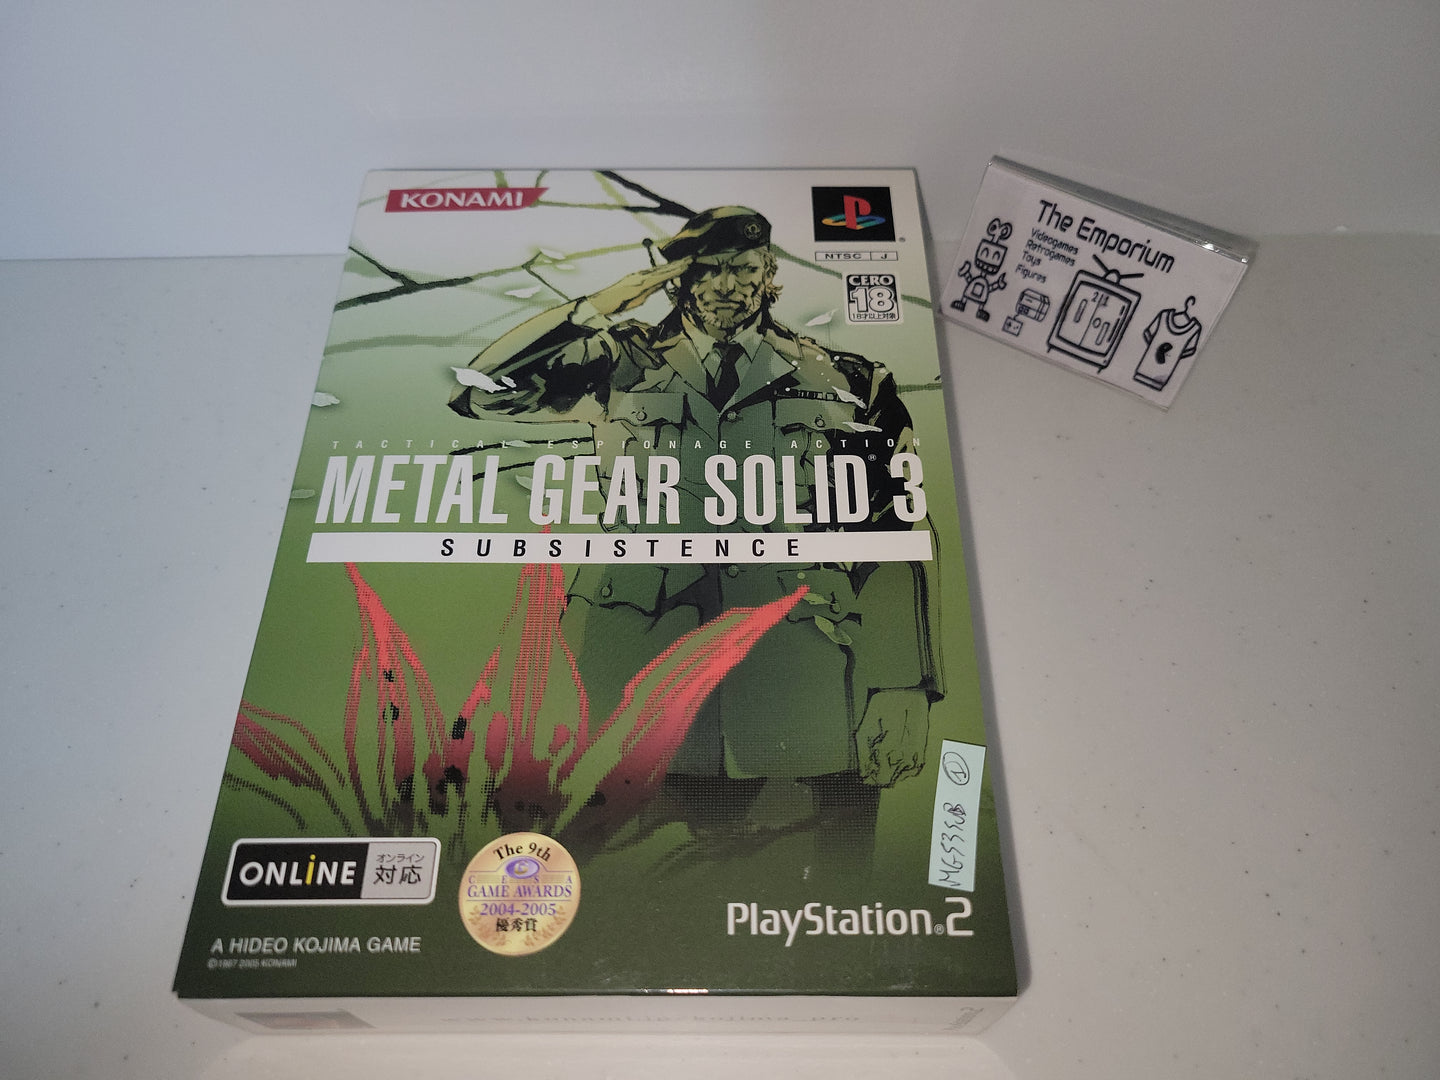 Metal Gear Solid 3 Subsistence [First Print Limited Edition] - Sony playstation 2